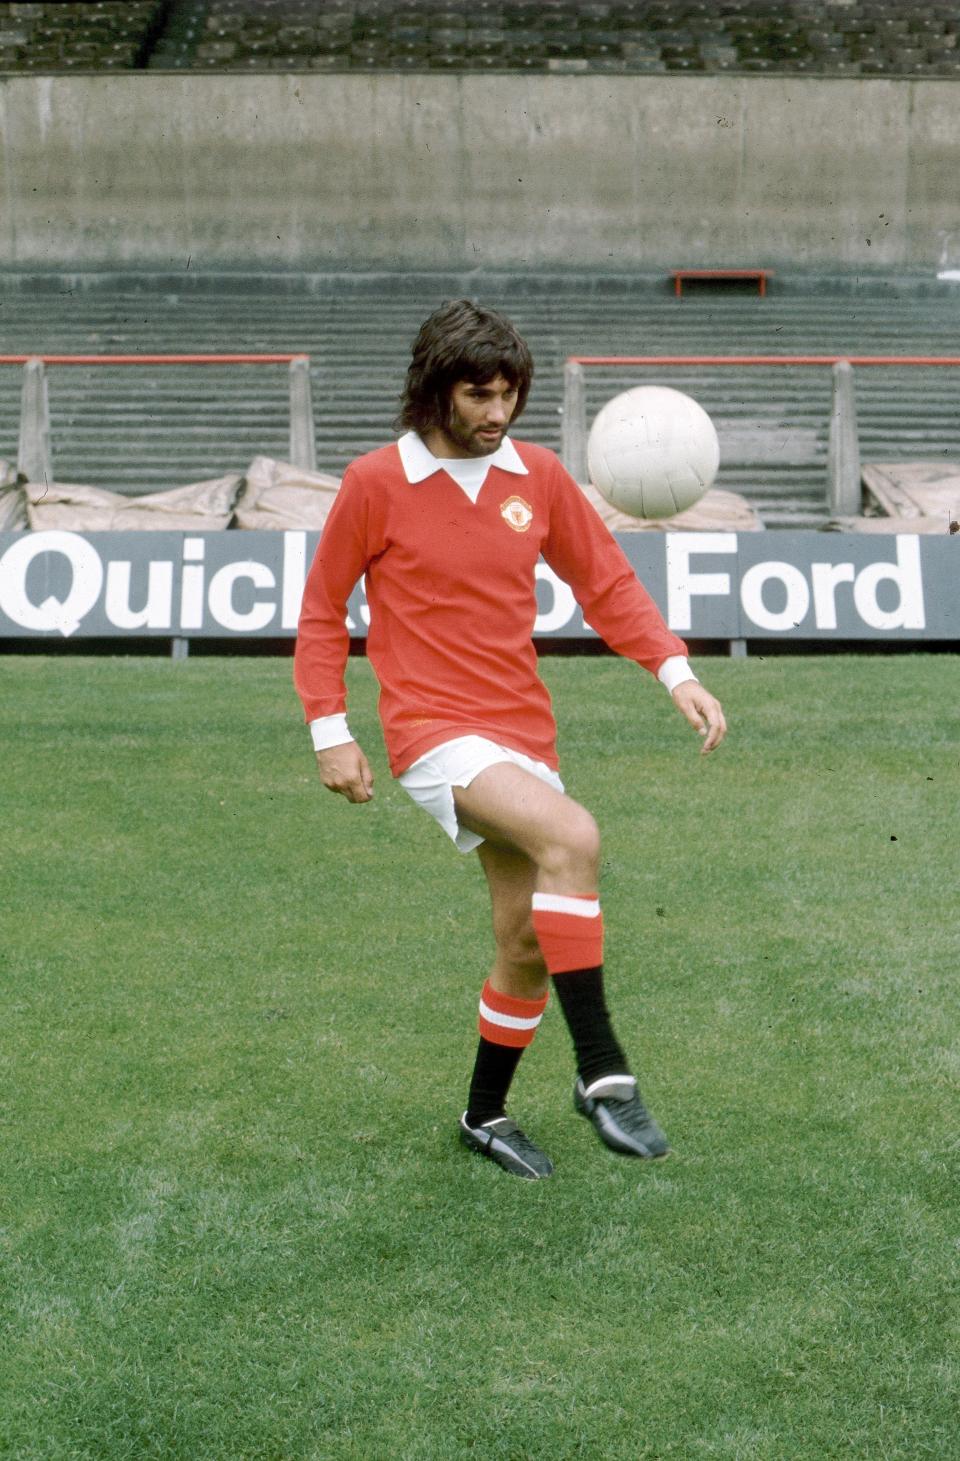 George Best, "The Fifth Beatle."